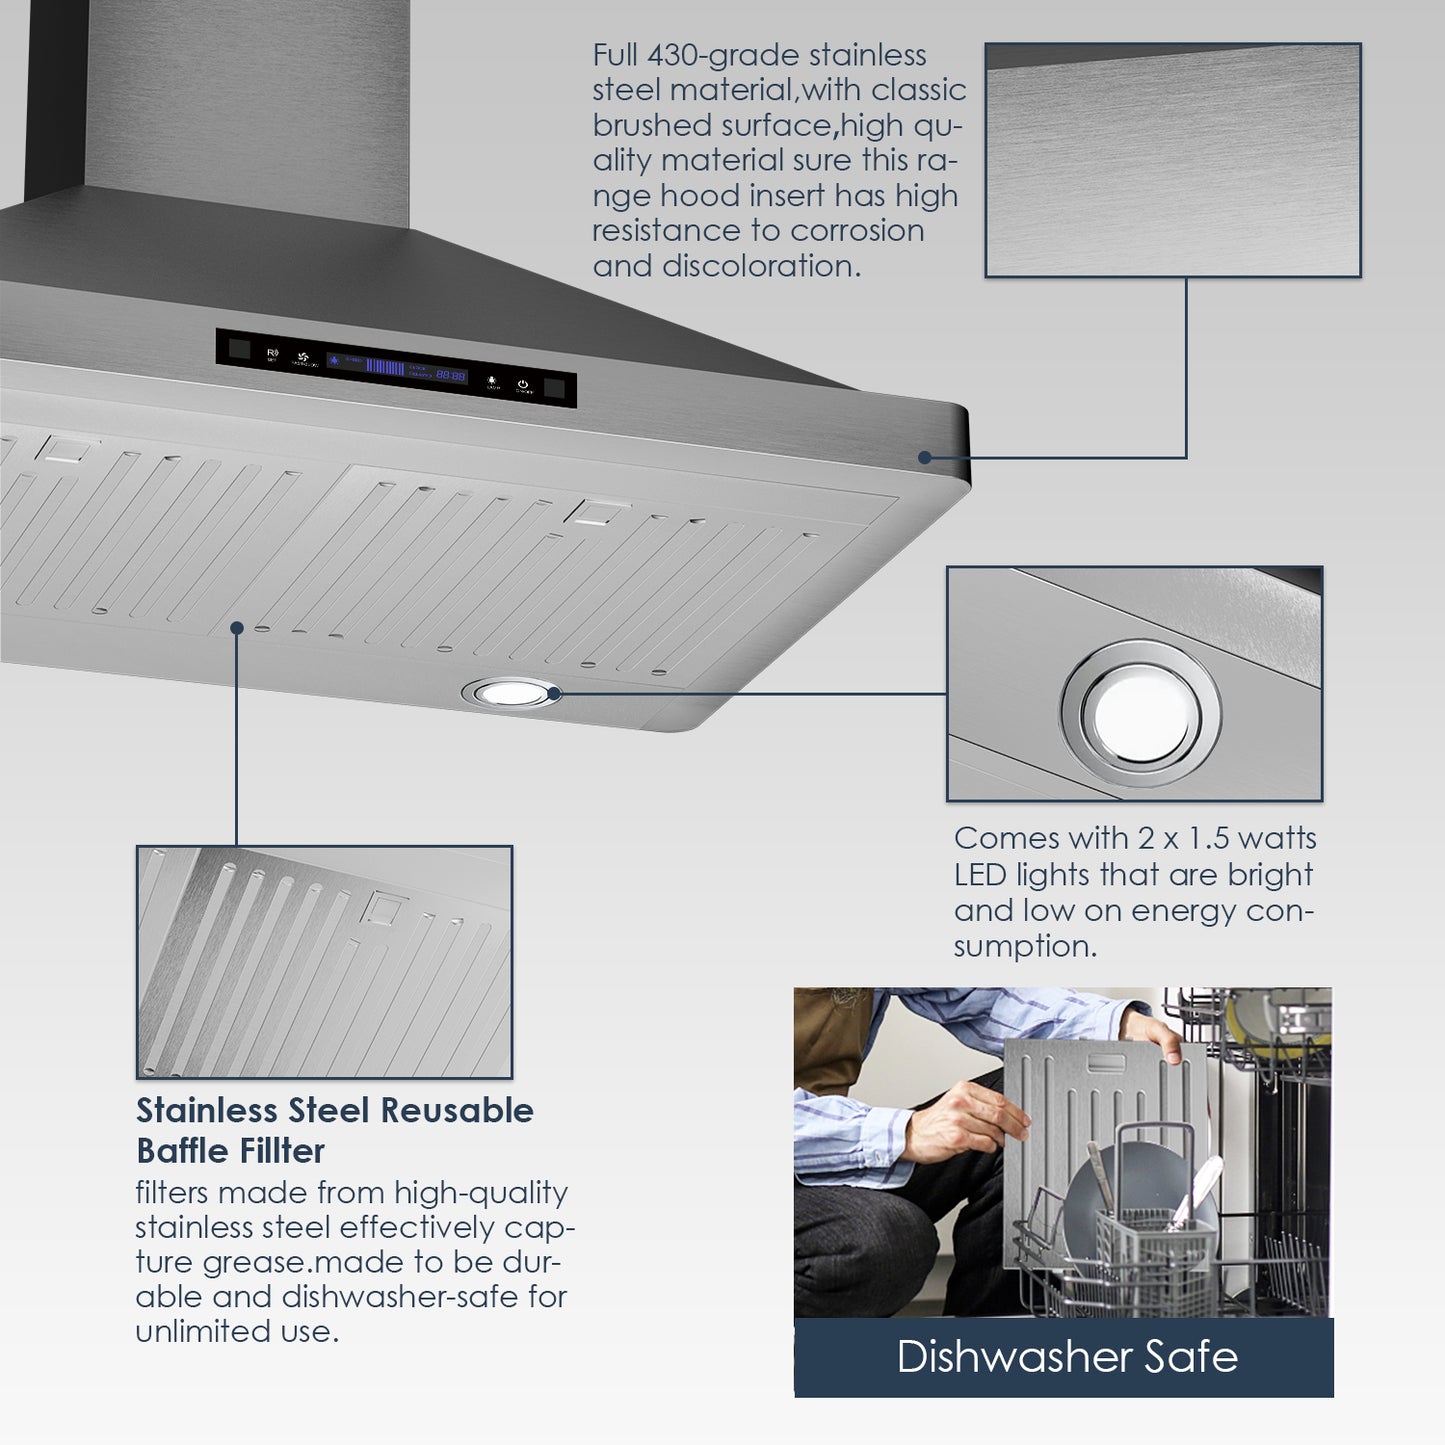 SOONYE Wall Mount Range Hood 30 inch with Ducted/Ductless Convertible,Stainless Steel Range Vent Hood 600 CFM with 2 Pcs Baffle Filters,3 Speed Exhaust Fan,LED Lights,Touch Control